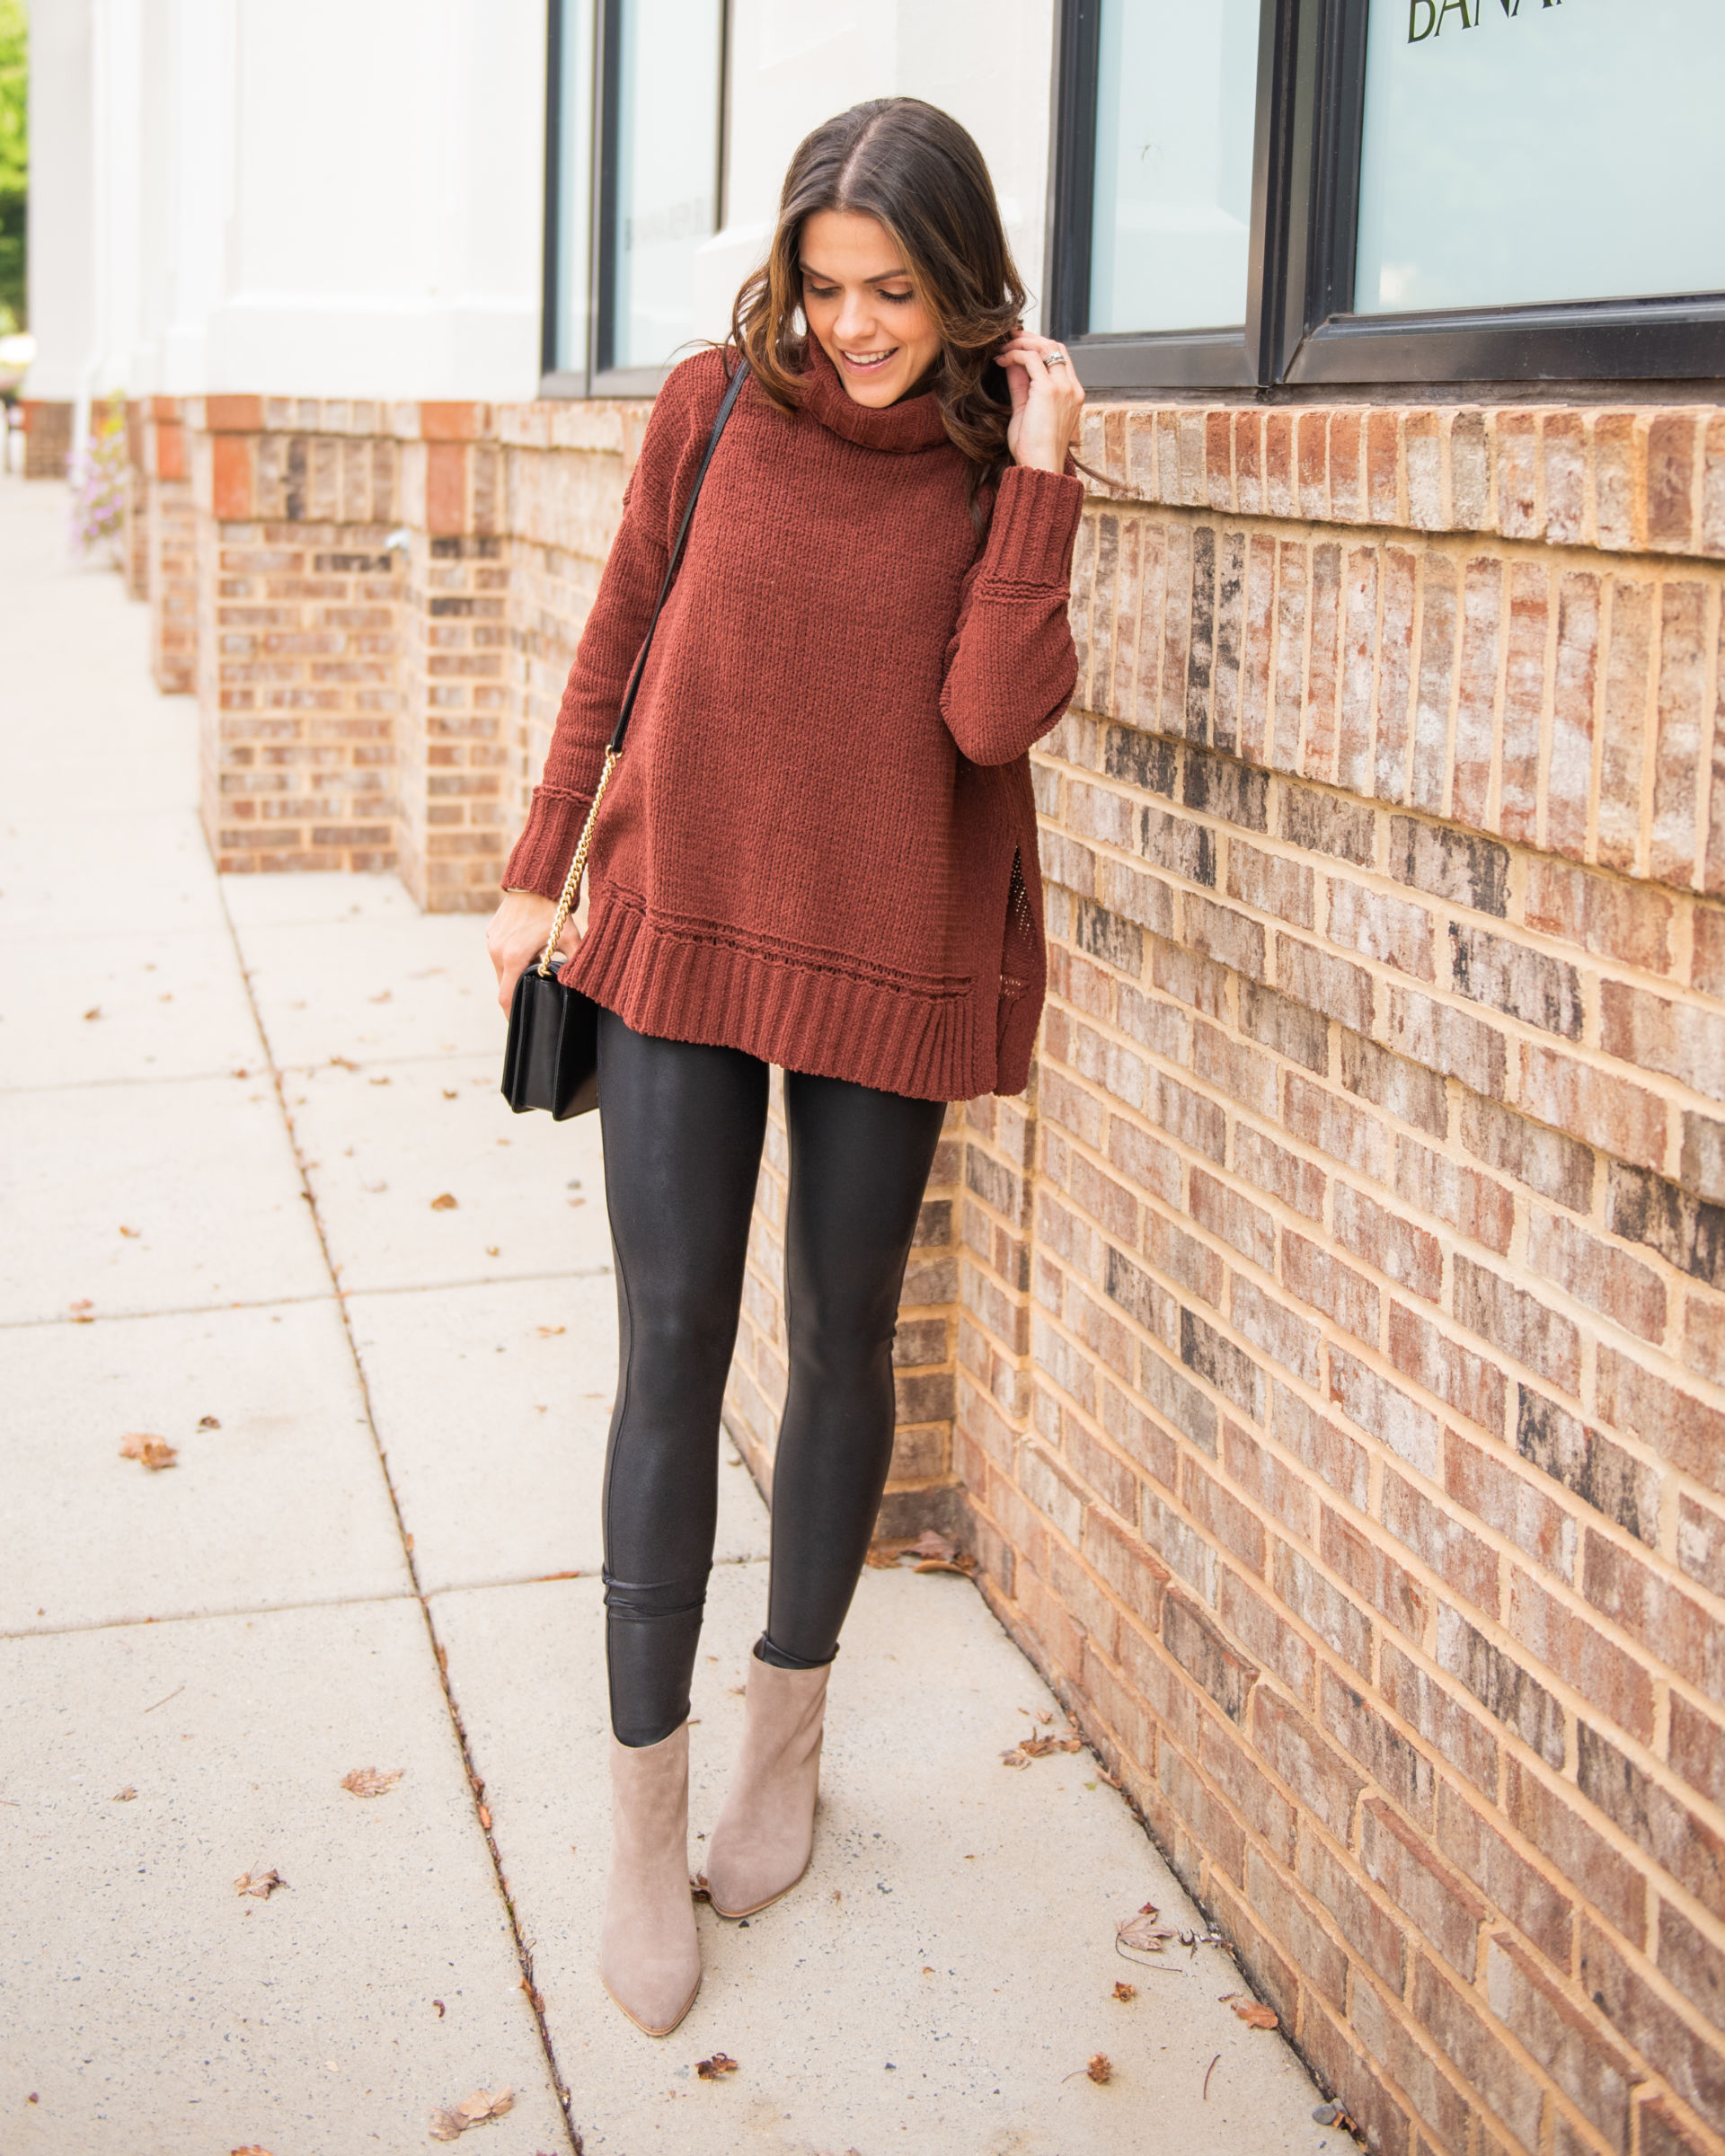 tunic sweater with black Spanx leggings and printed booties